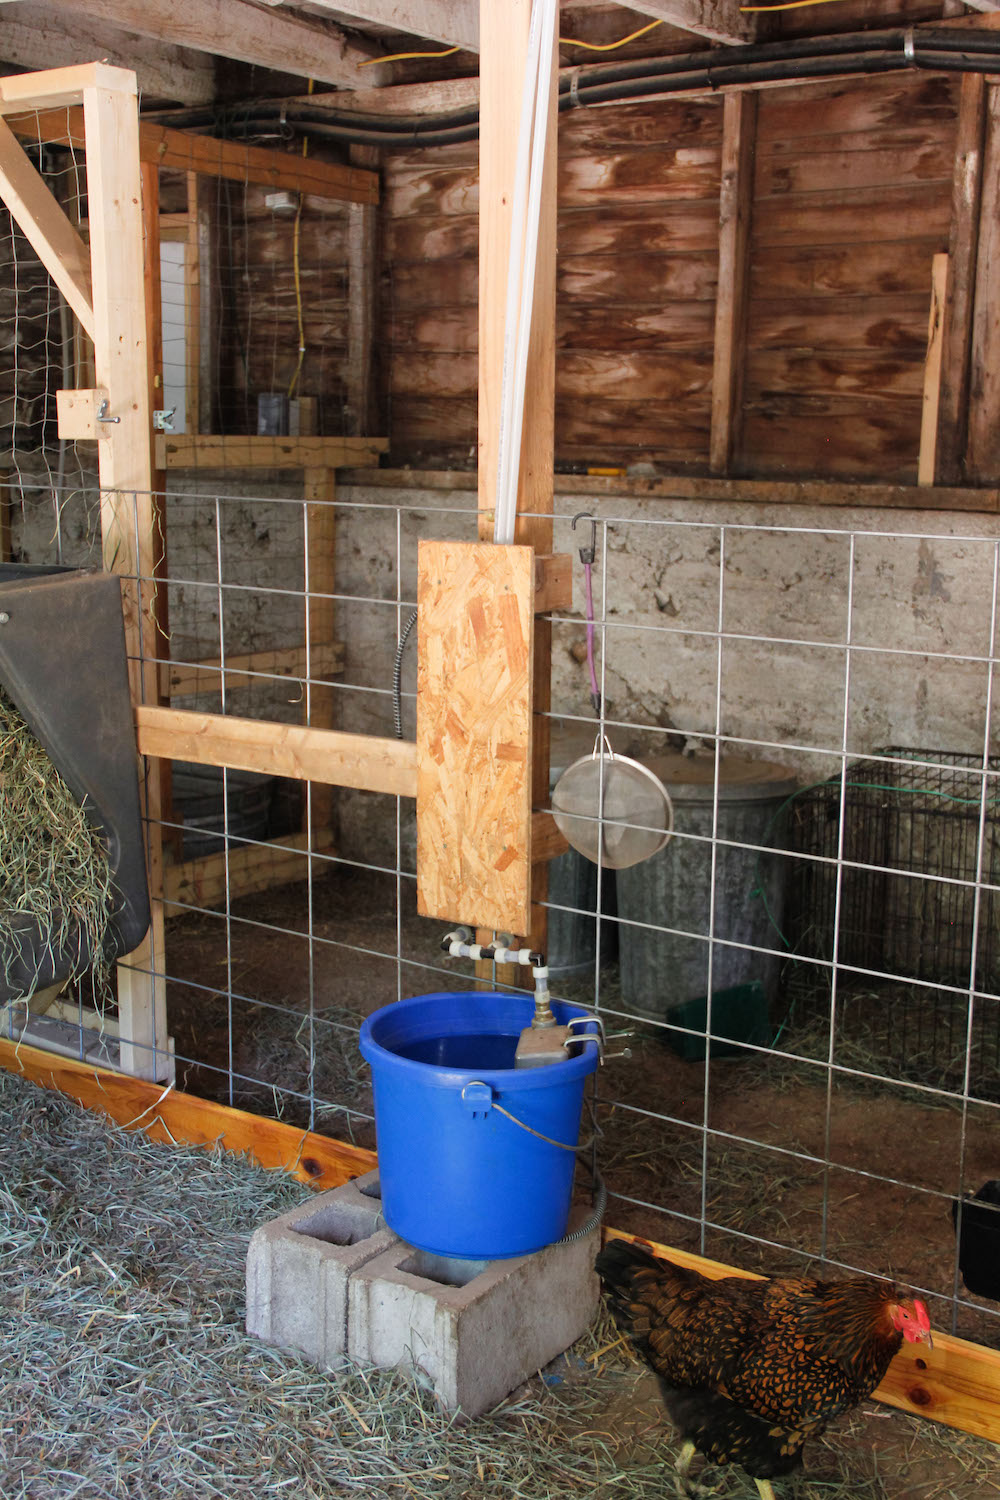 Sanitation and keeping goats and chickens healthy